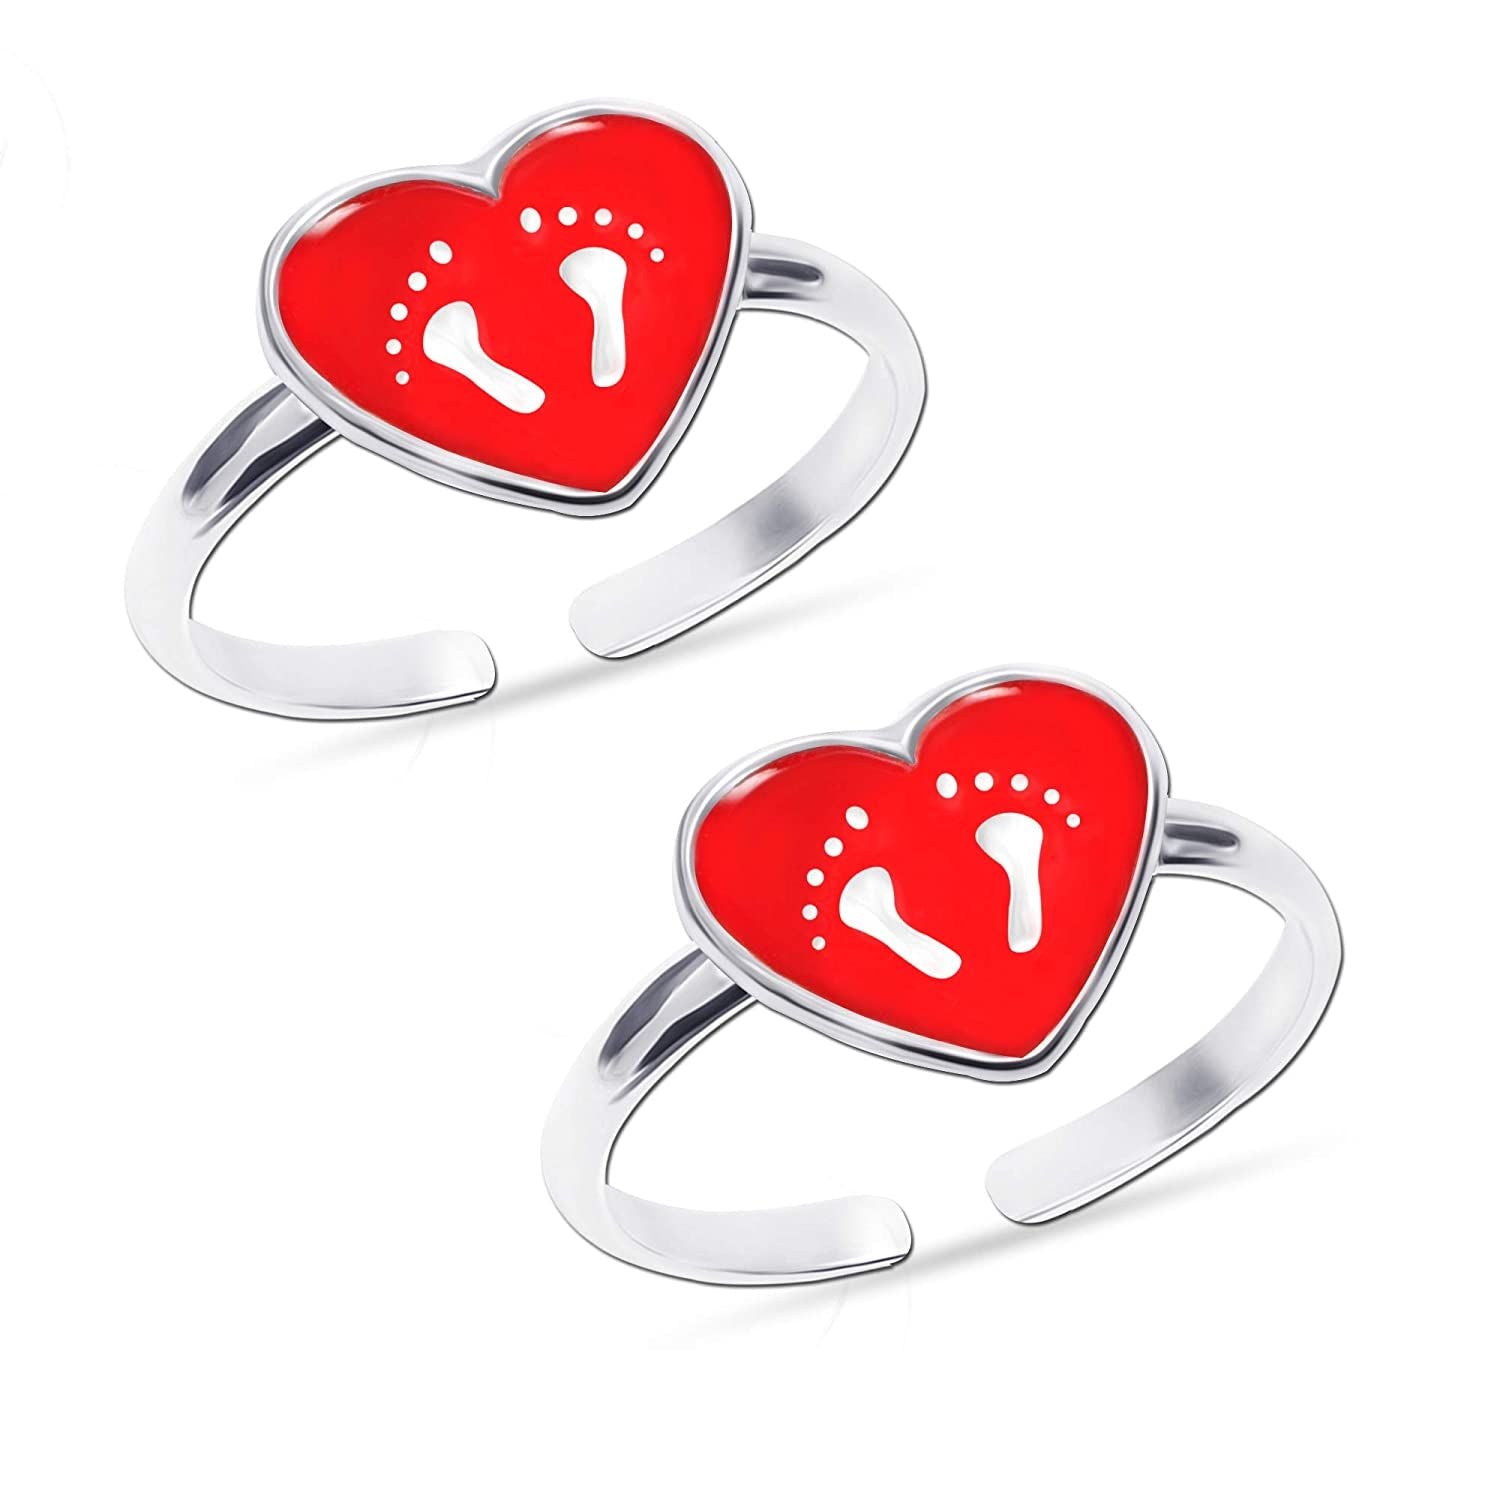 Buy Red Heart Ring Valentines Day Gift for Her for Girl, Romantic Love Ring,  Personalized Best Friend Birthday Girlfriend Gifts Handmade Jewelry Online  in India - Etsy